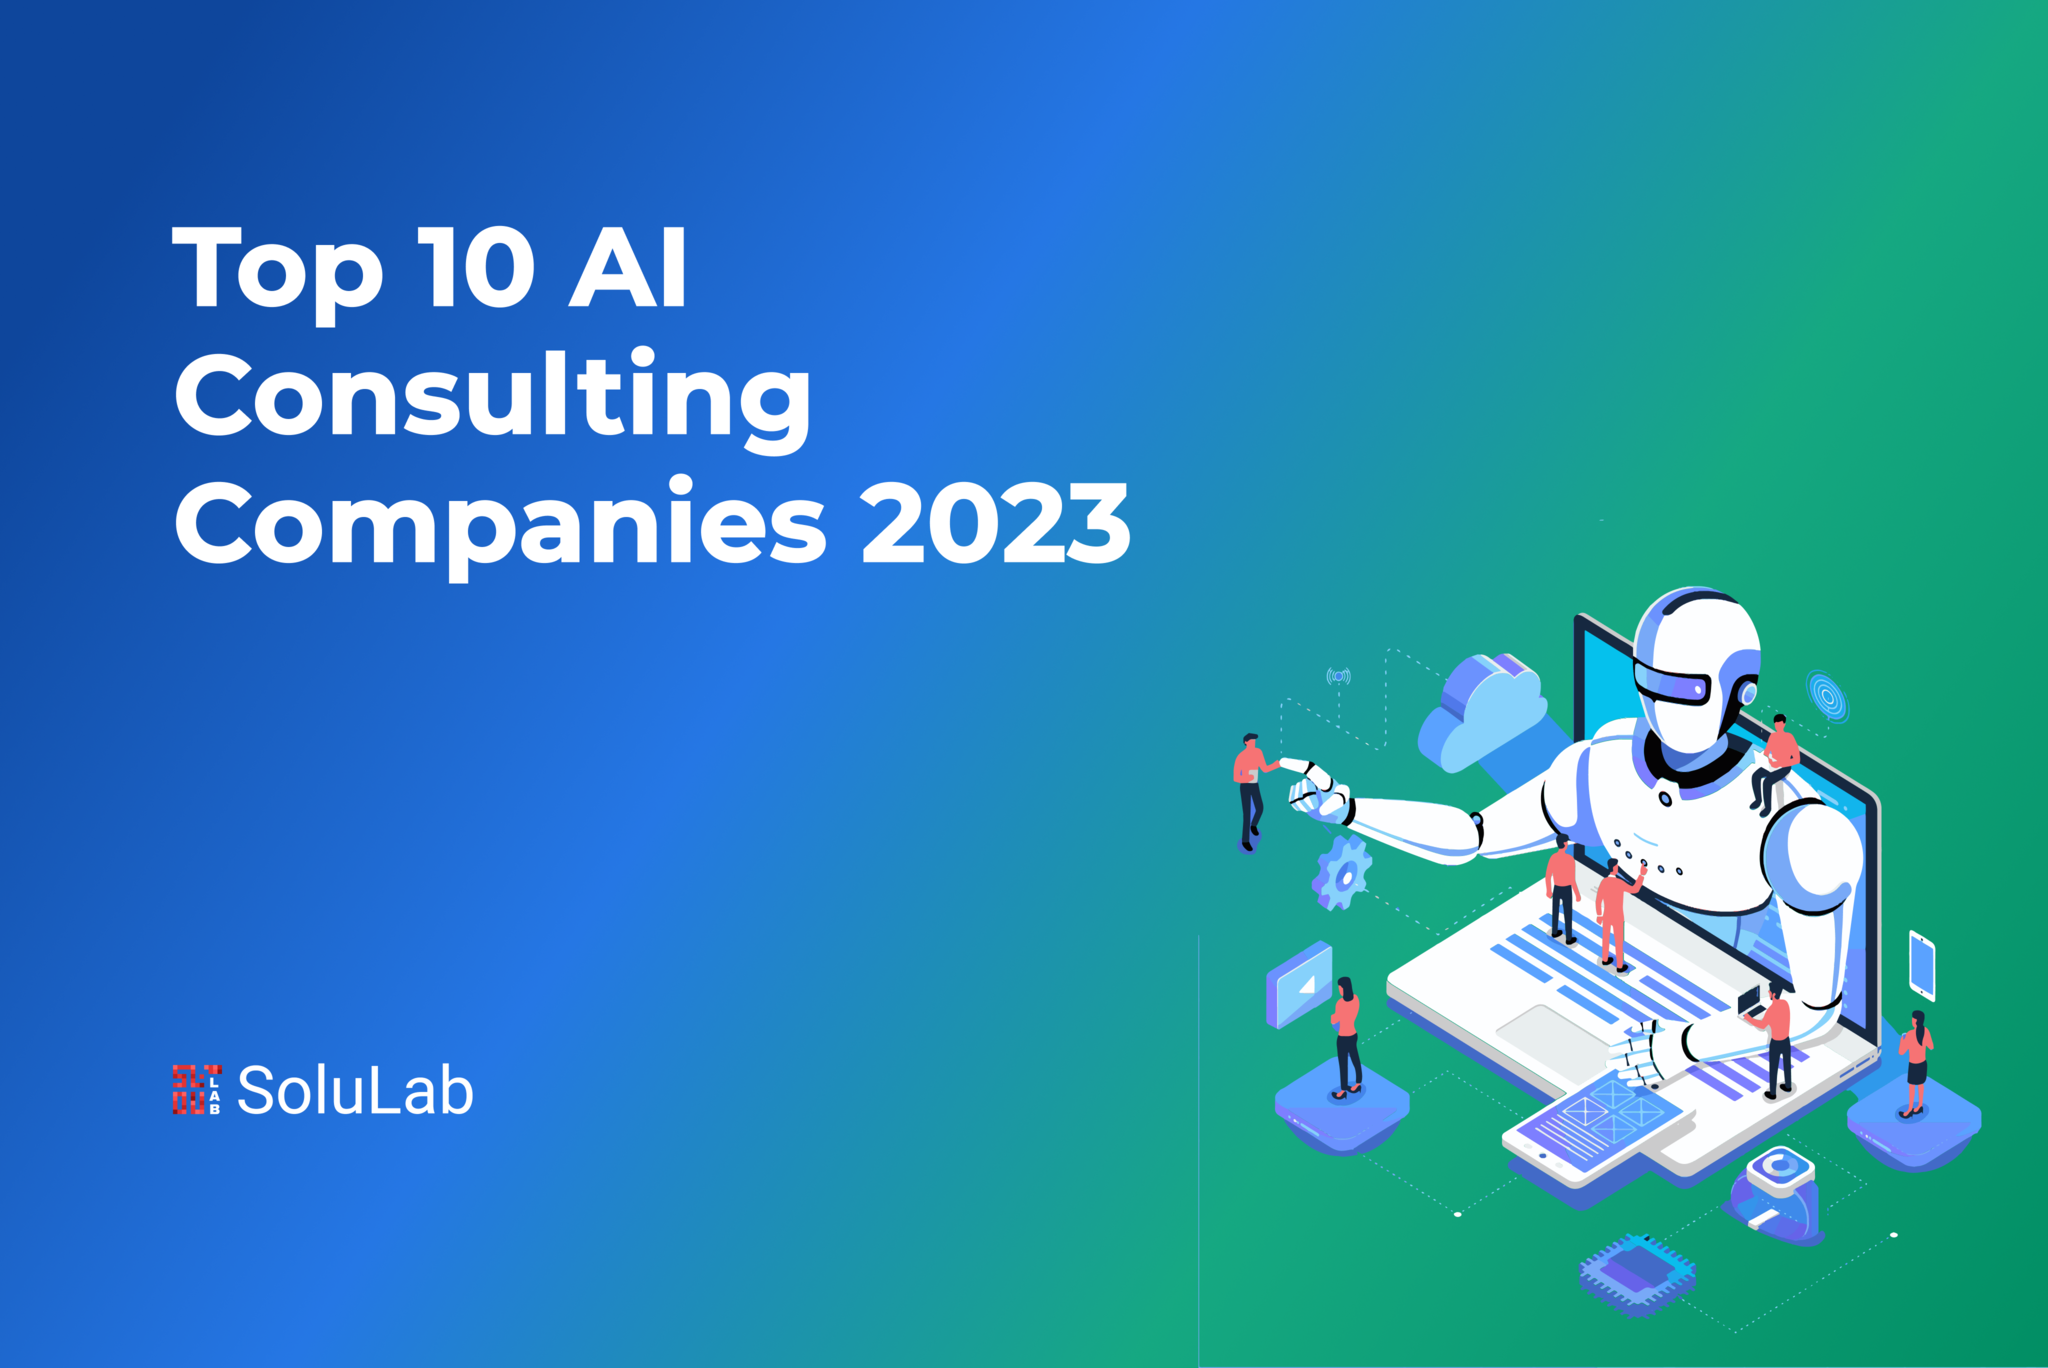 Top 10 AI Consulting Companies 2023